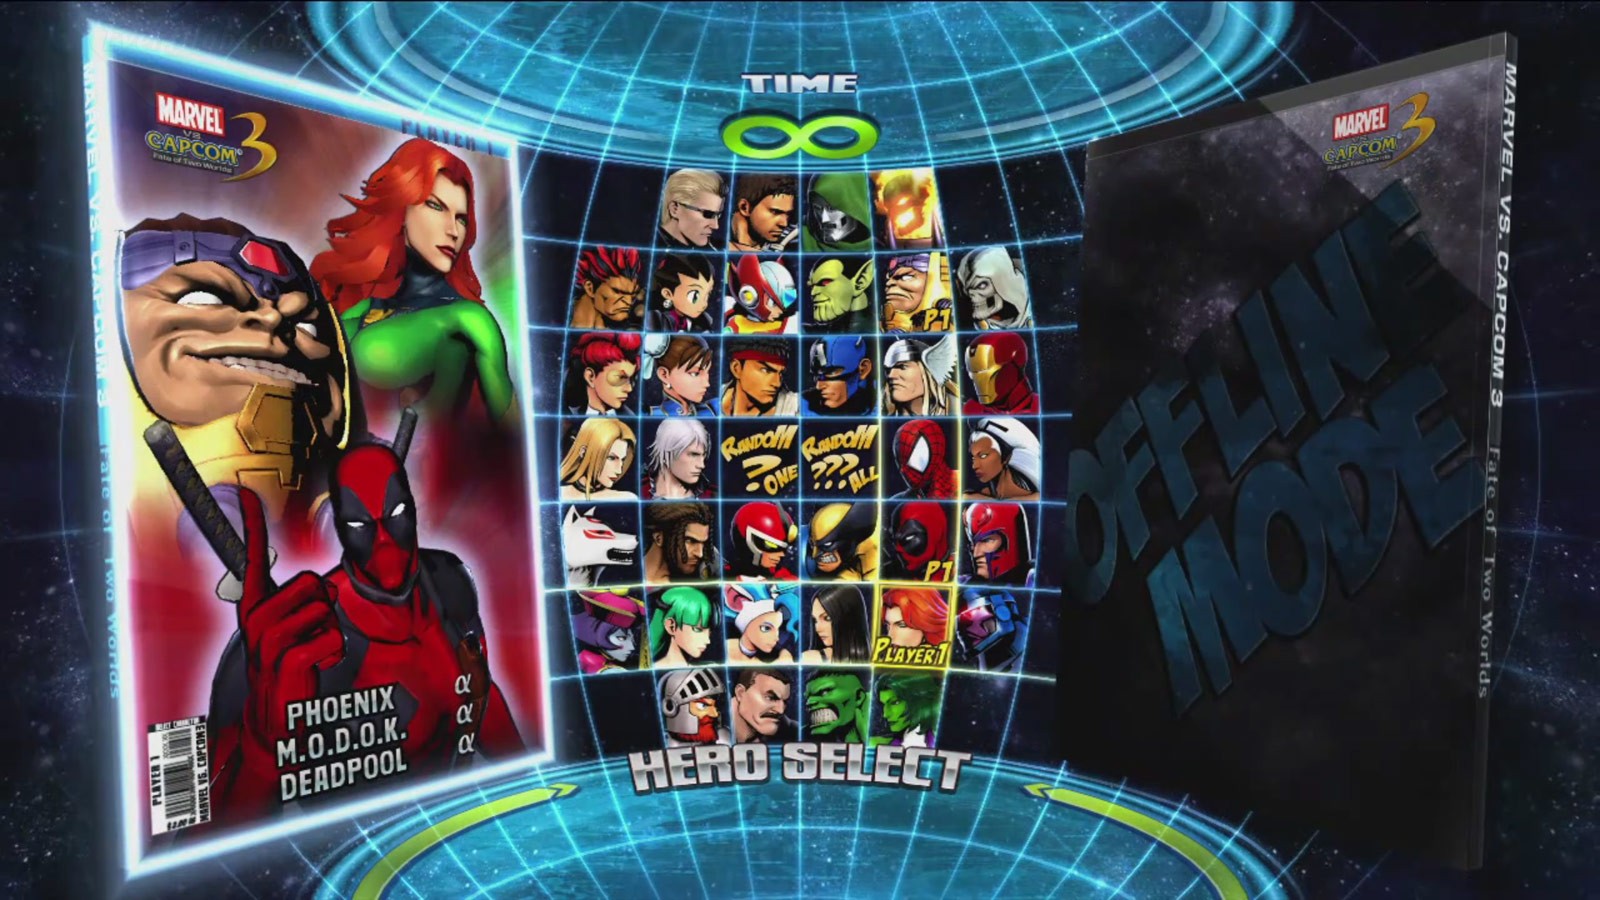 The character select screen for Marvel vs Capcom 3